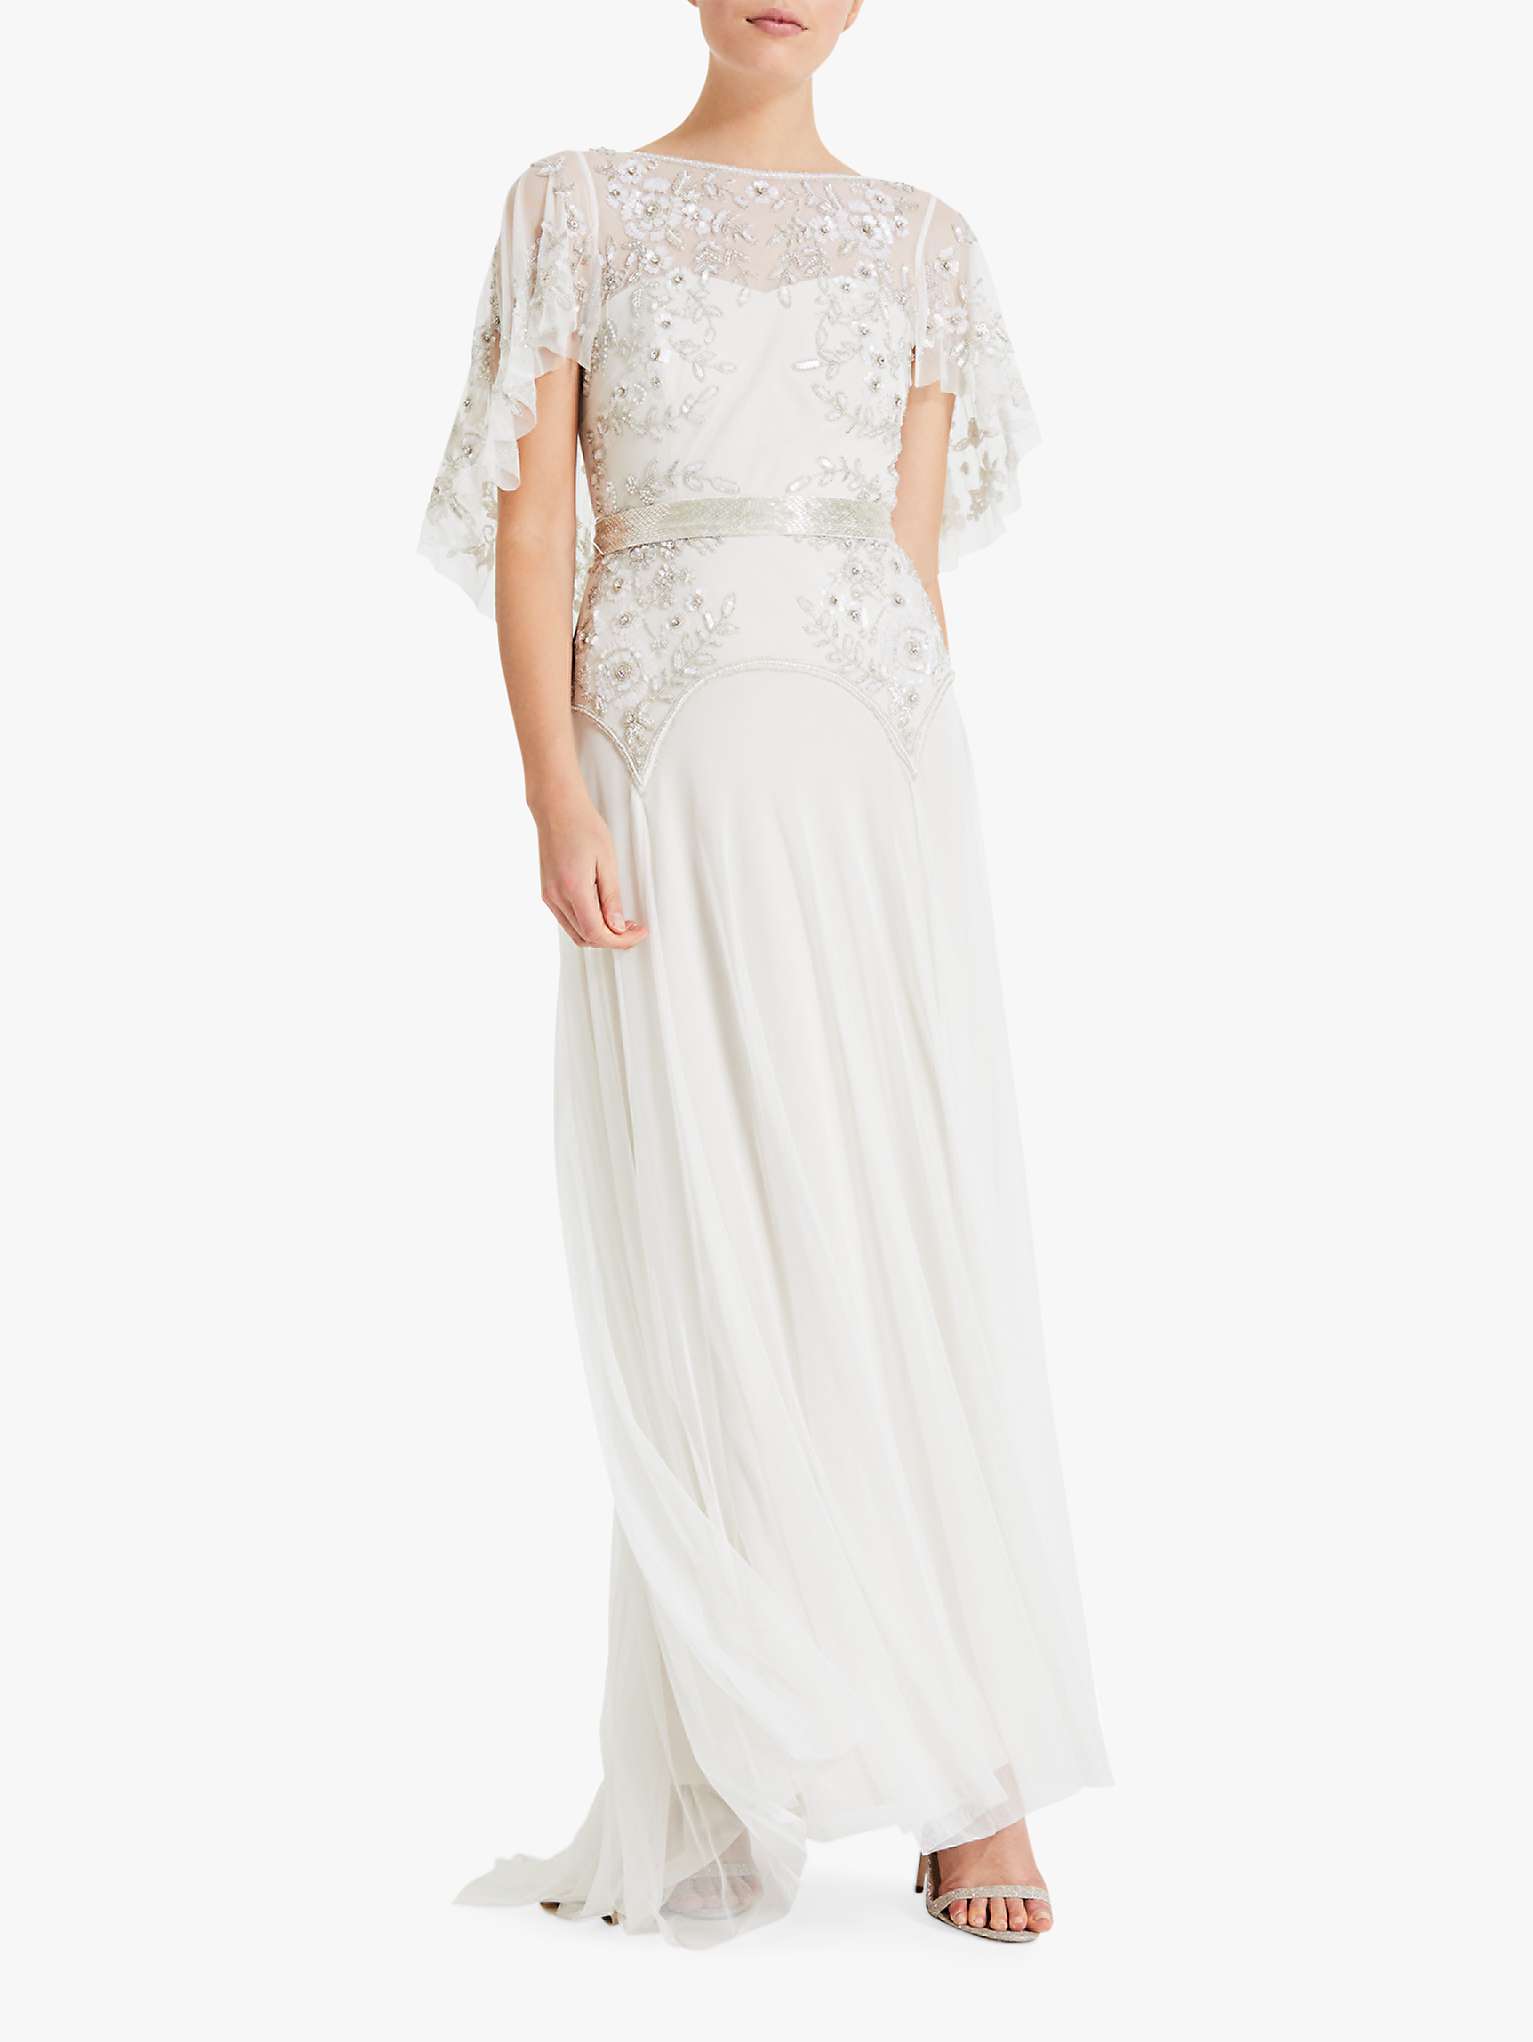 Phase Eight Louise Embellished Bridal Dress, Champagne at